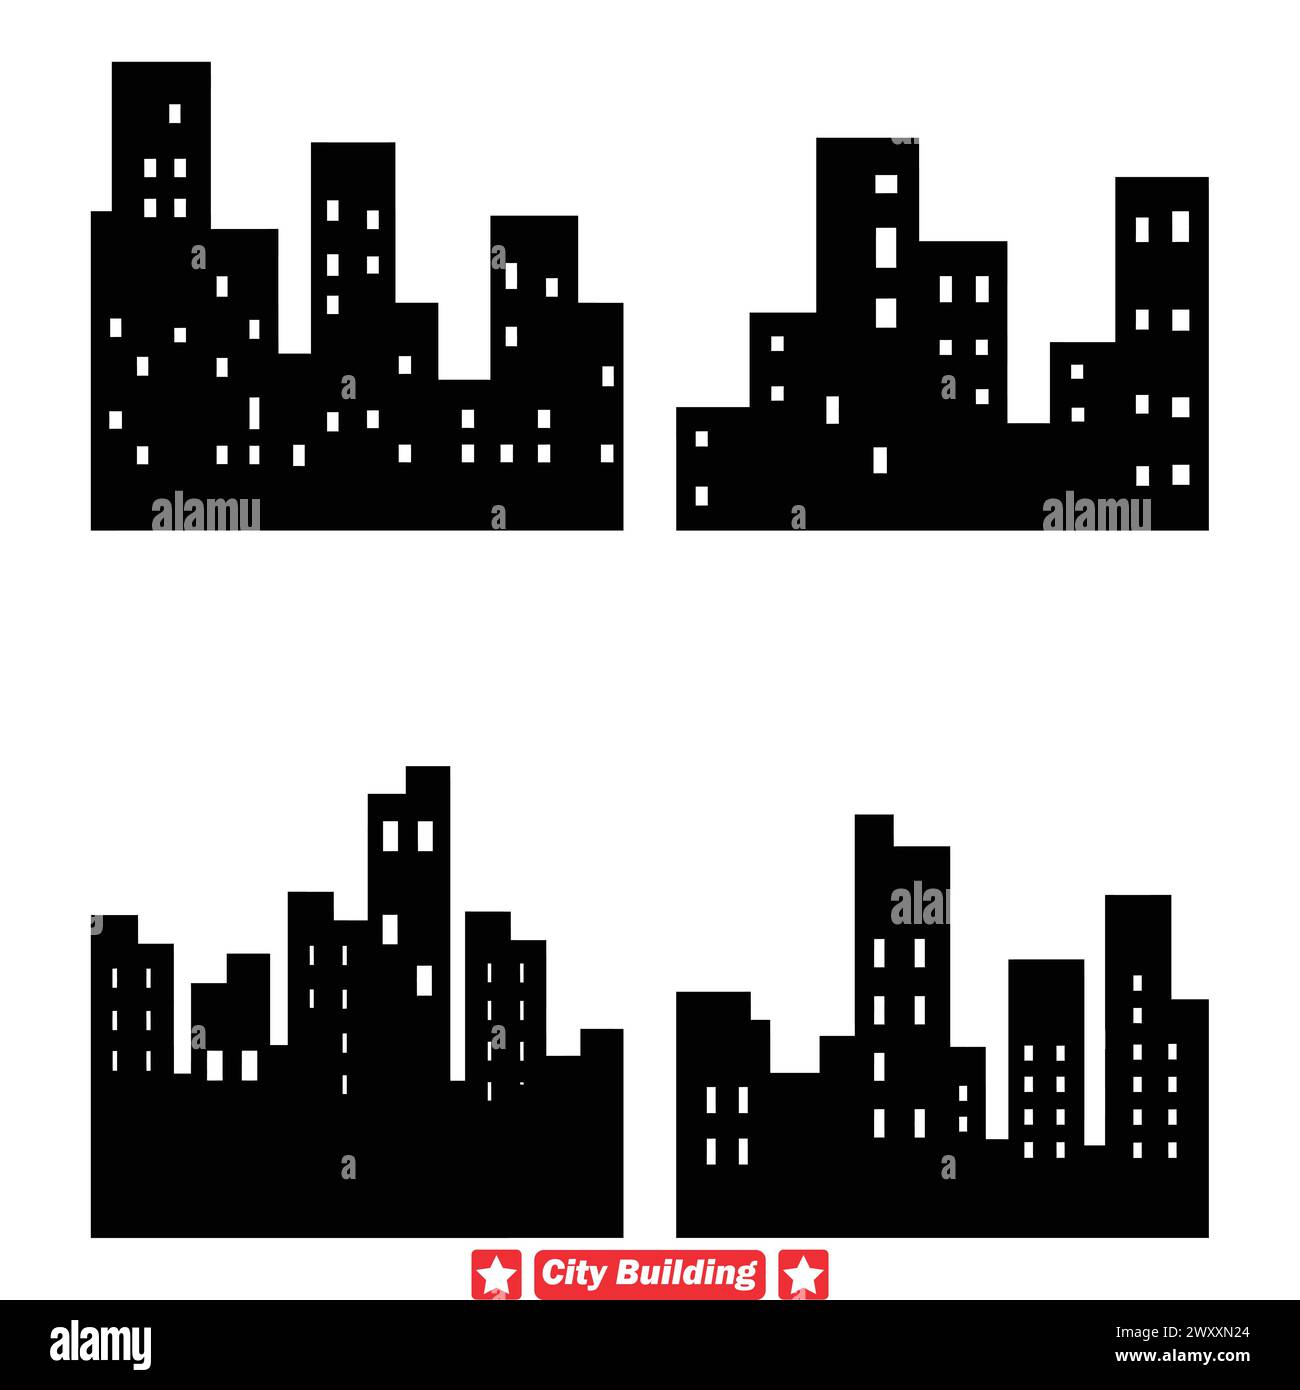 City Architecture Ensemble Vector Silhouettes for Vibrant Skylines Stock Vector